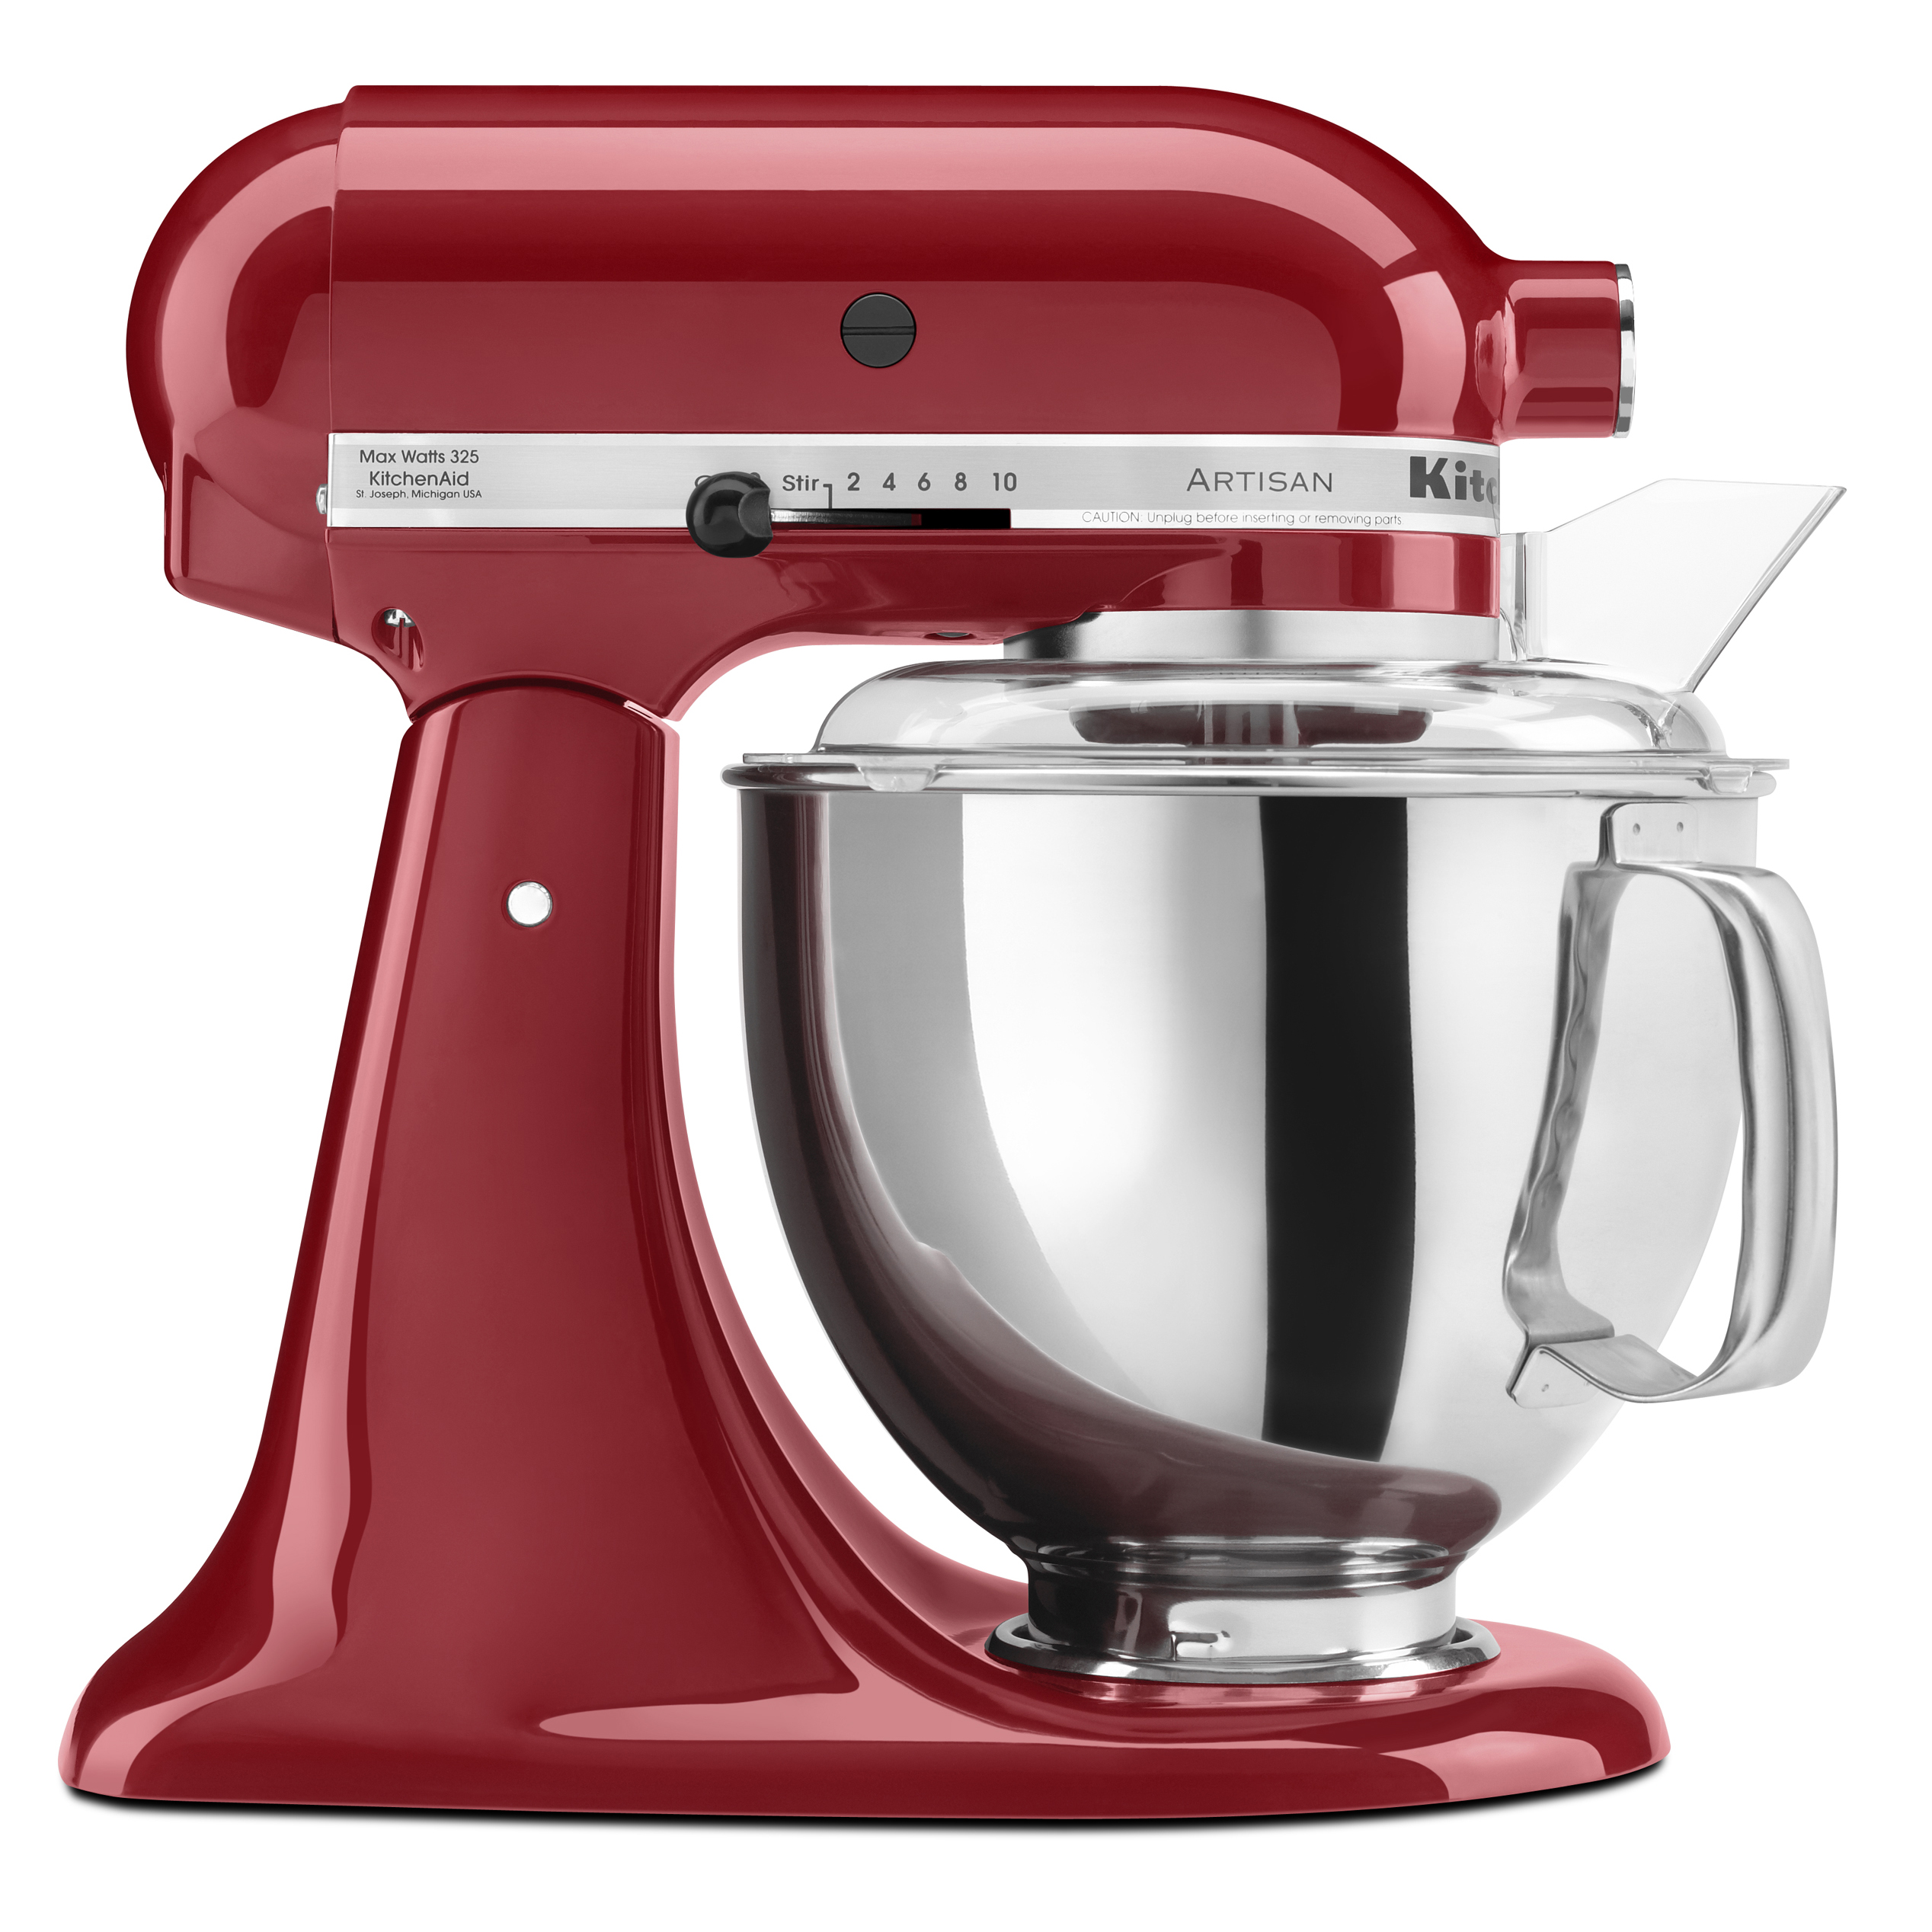 Black Friday KitchenAid deals: A $200 Pro Series stand mixer and more - CNET